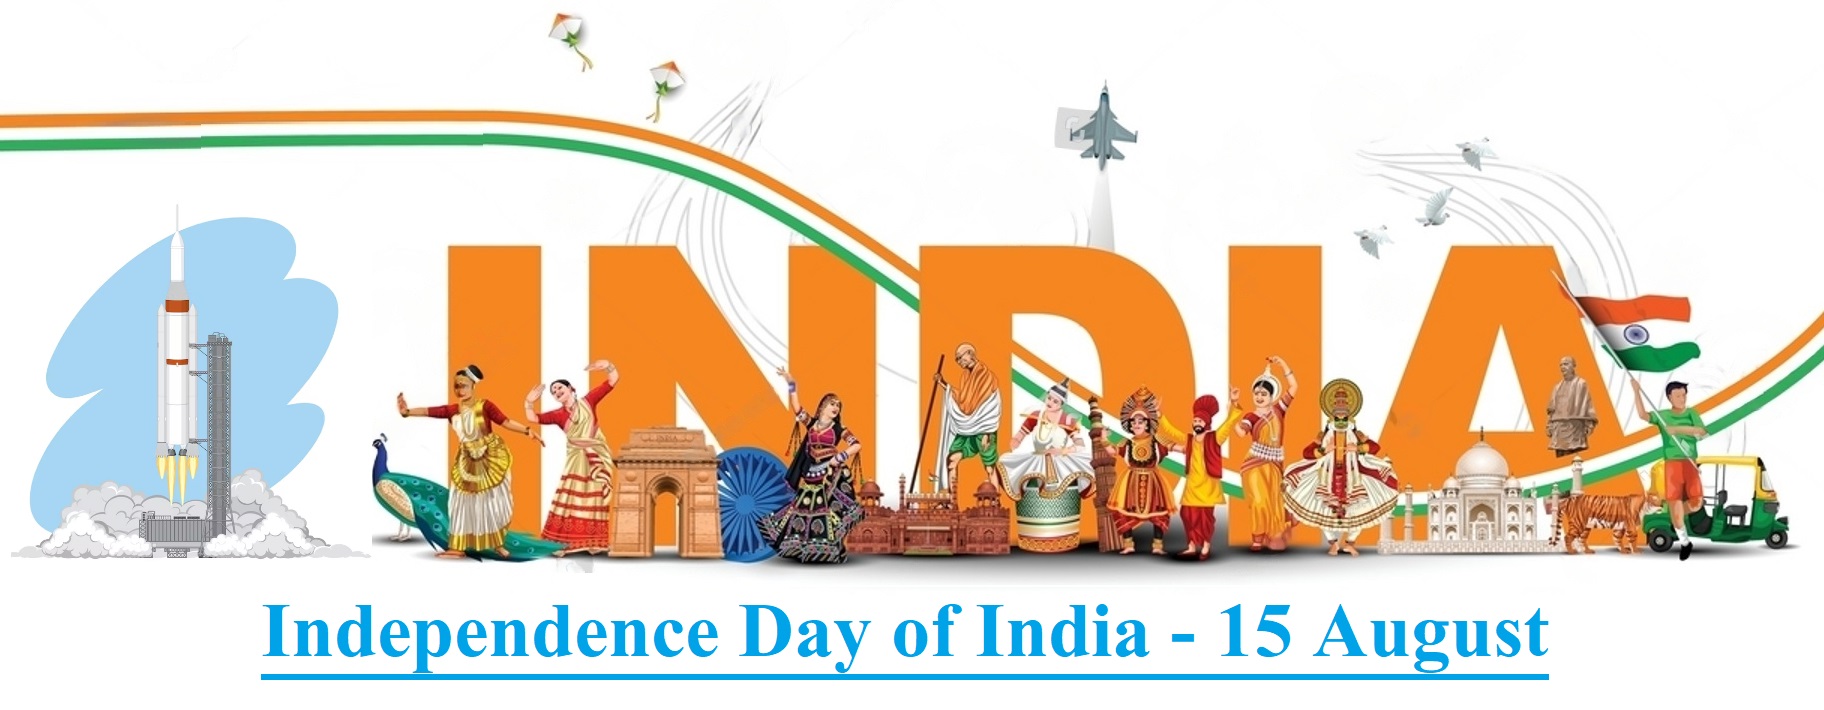 Independence Day of India 15 August